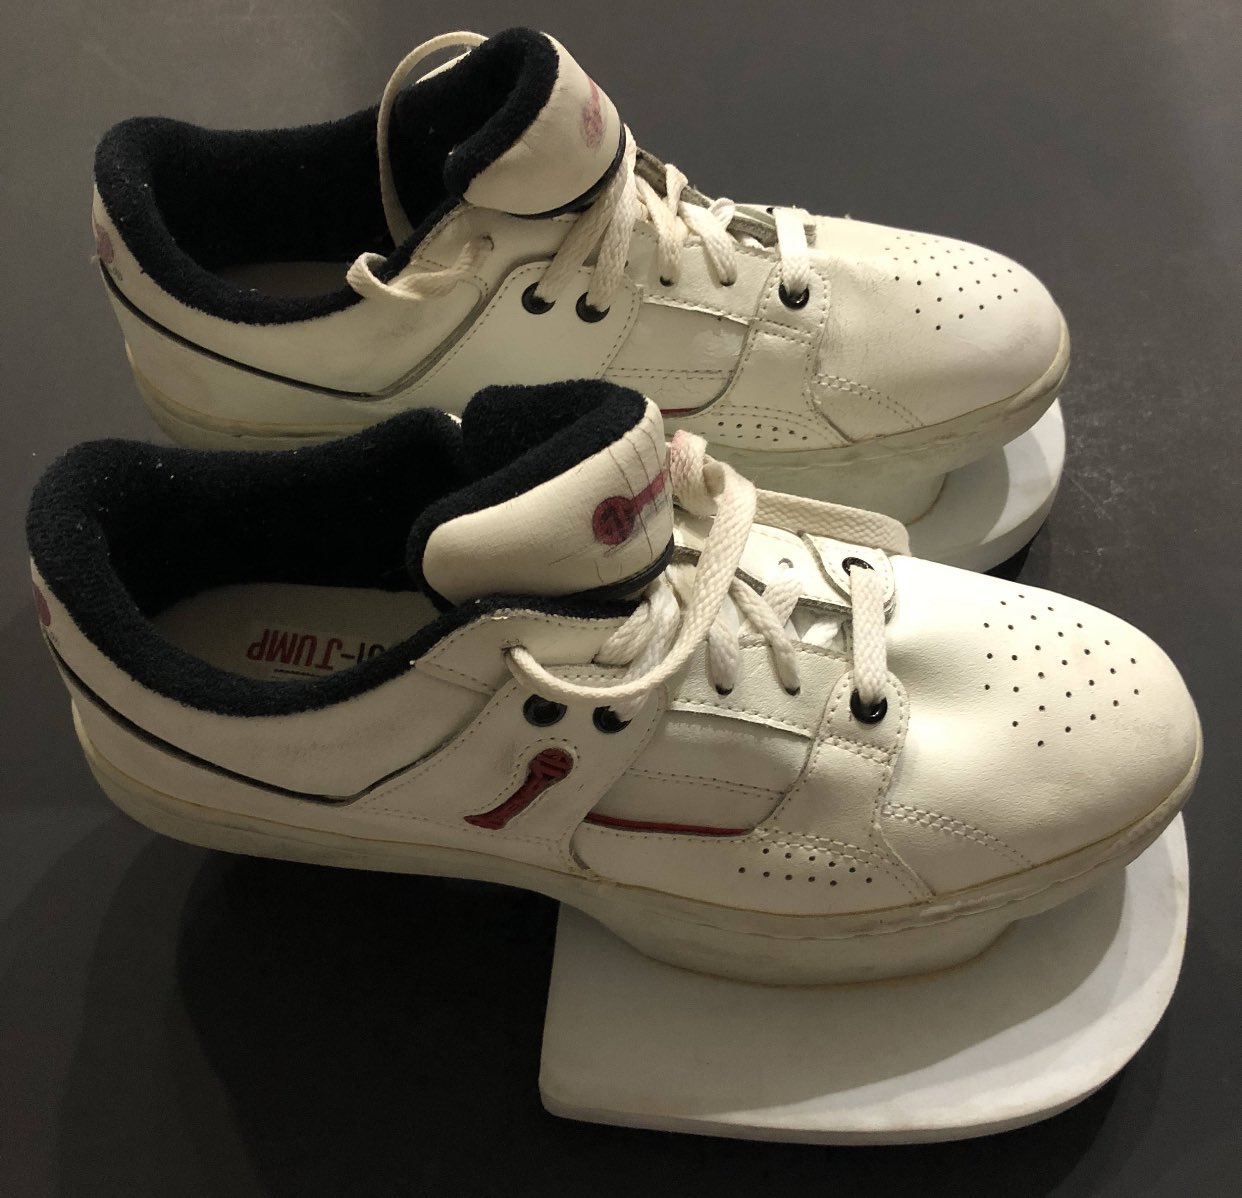 Goofy looking ATI strength shoes. Jump higher run faster. : r/nostalgia